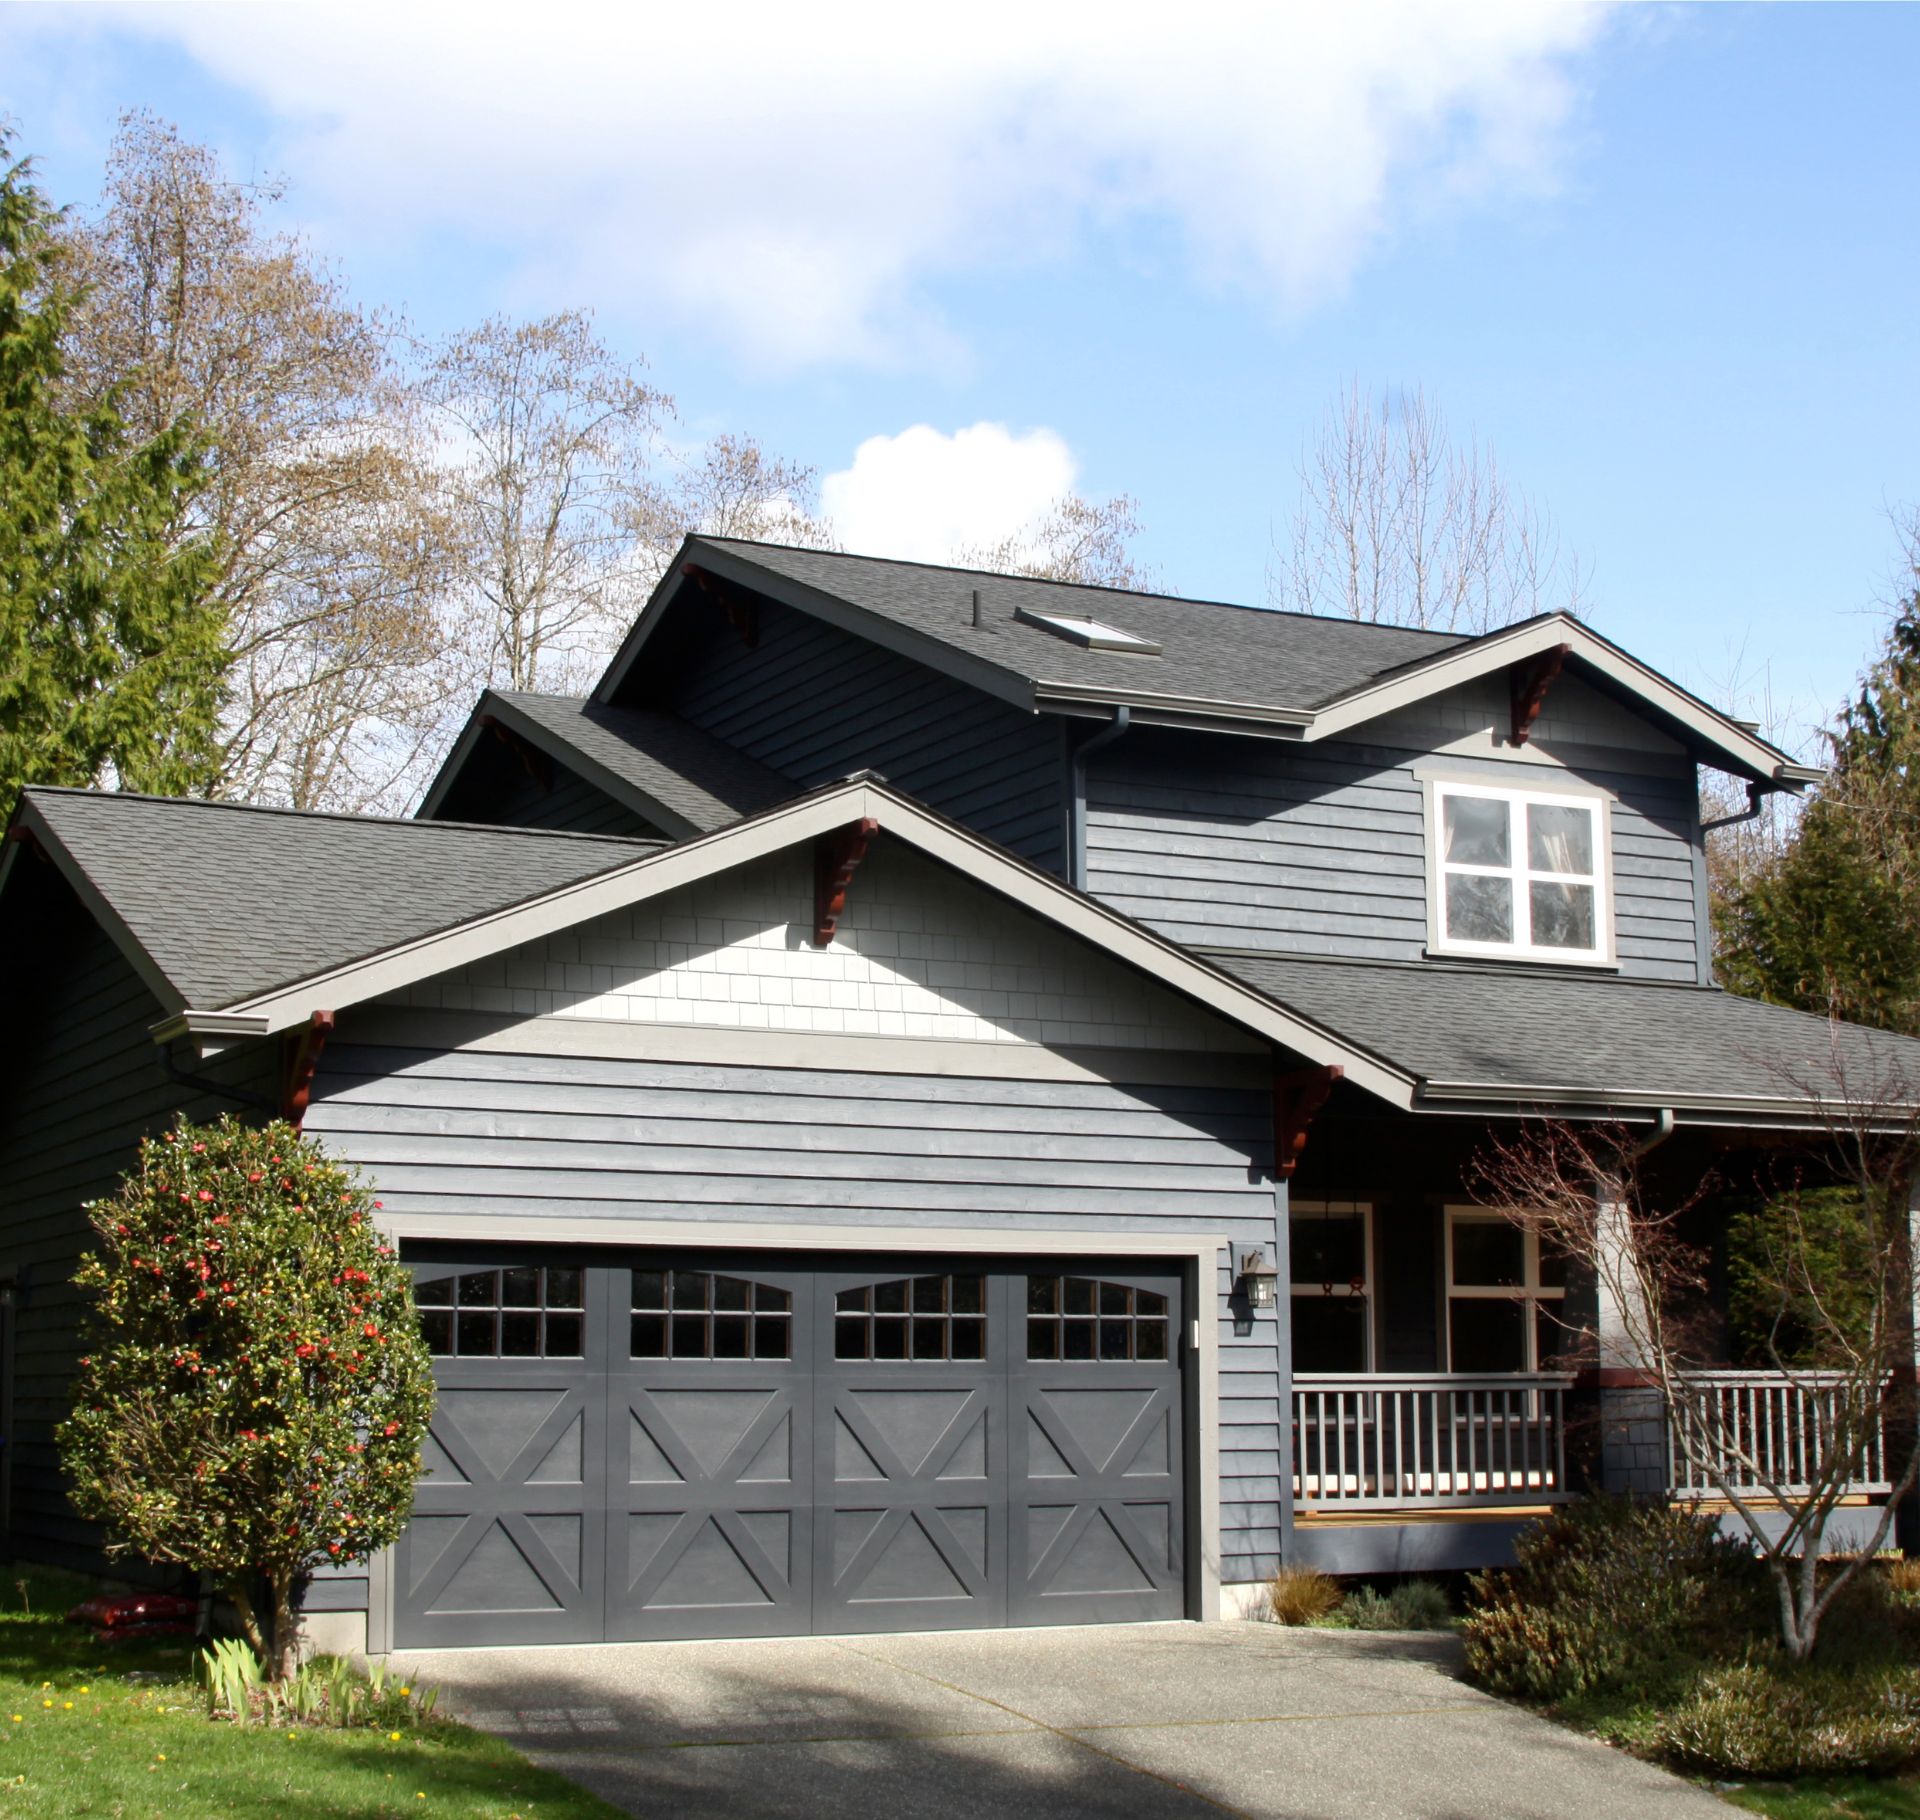 Choosing the Right Color for Your Budget Garage Door